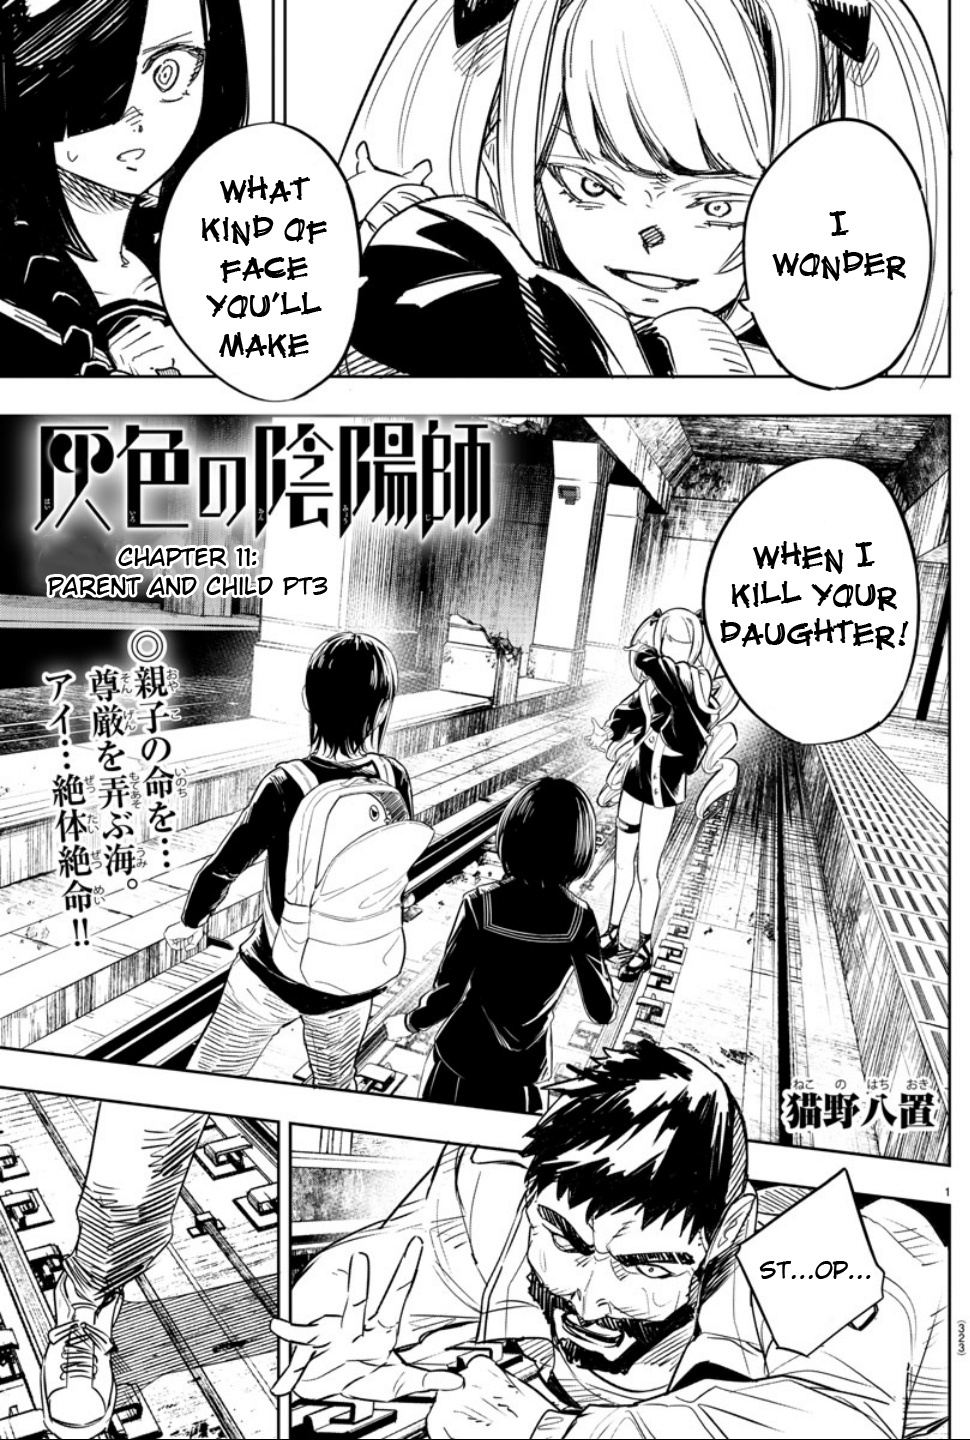 Haiiro No Onmyouji Chapter 11: Parent And Child Pt3 - Picture 1